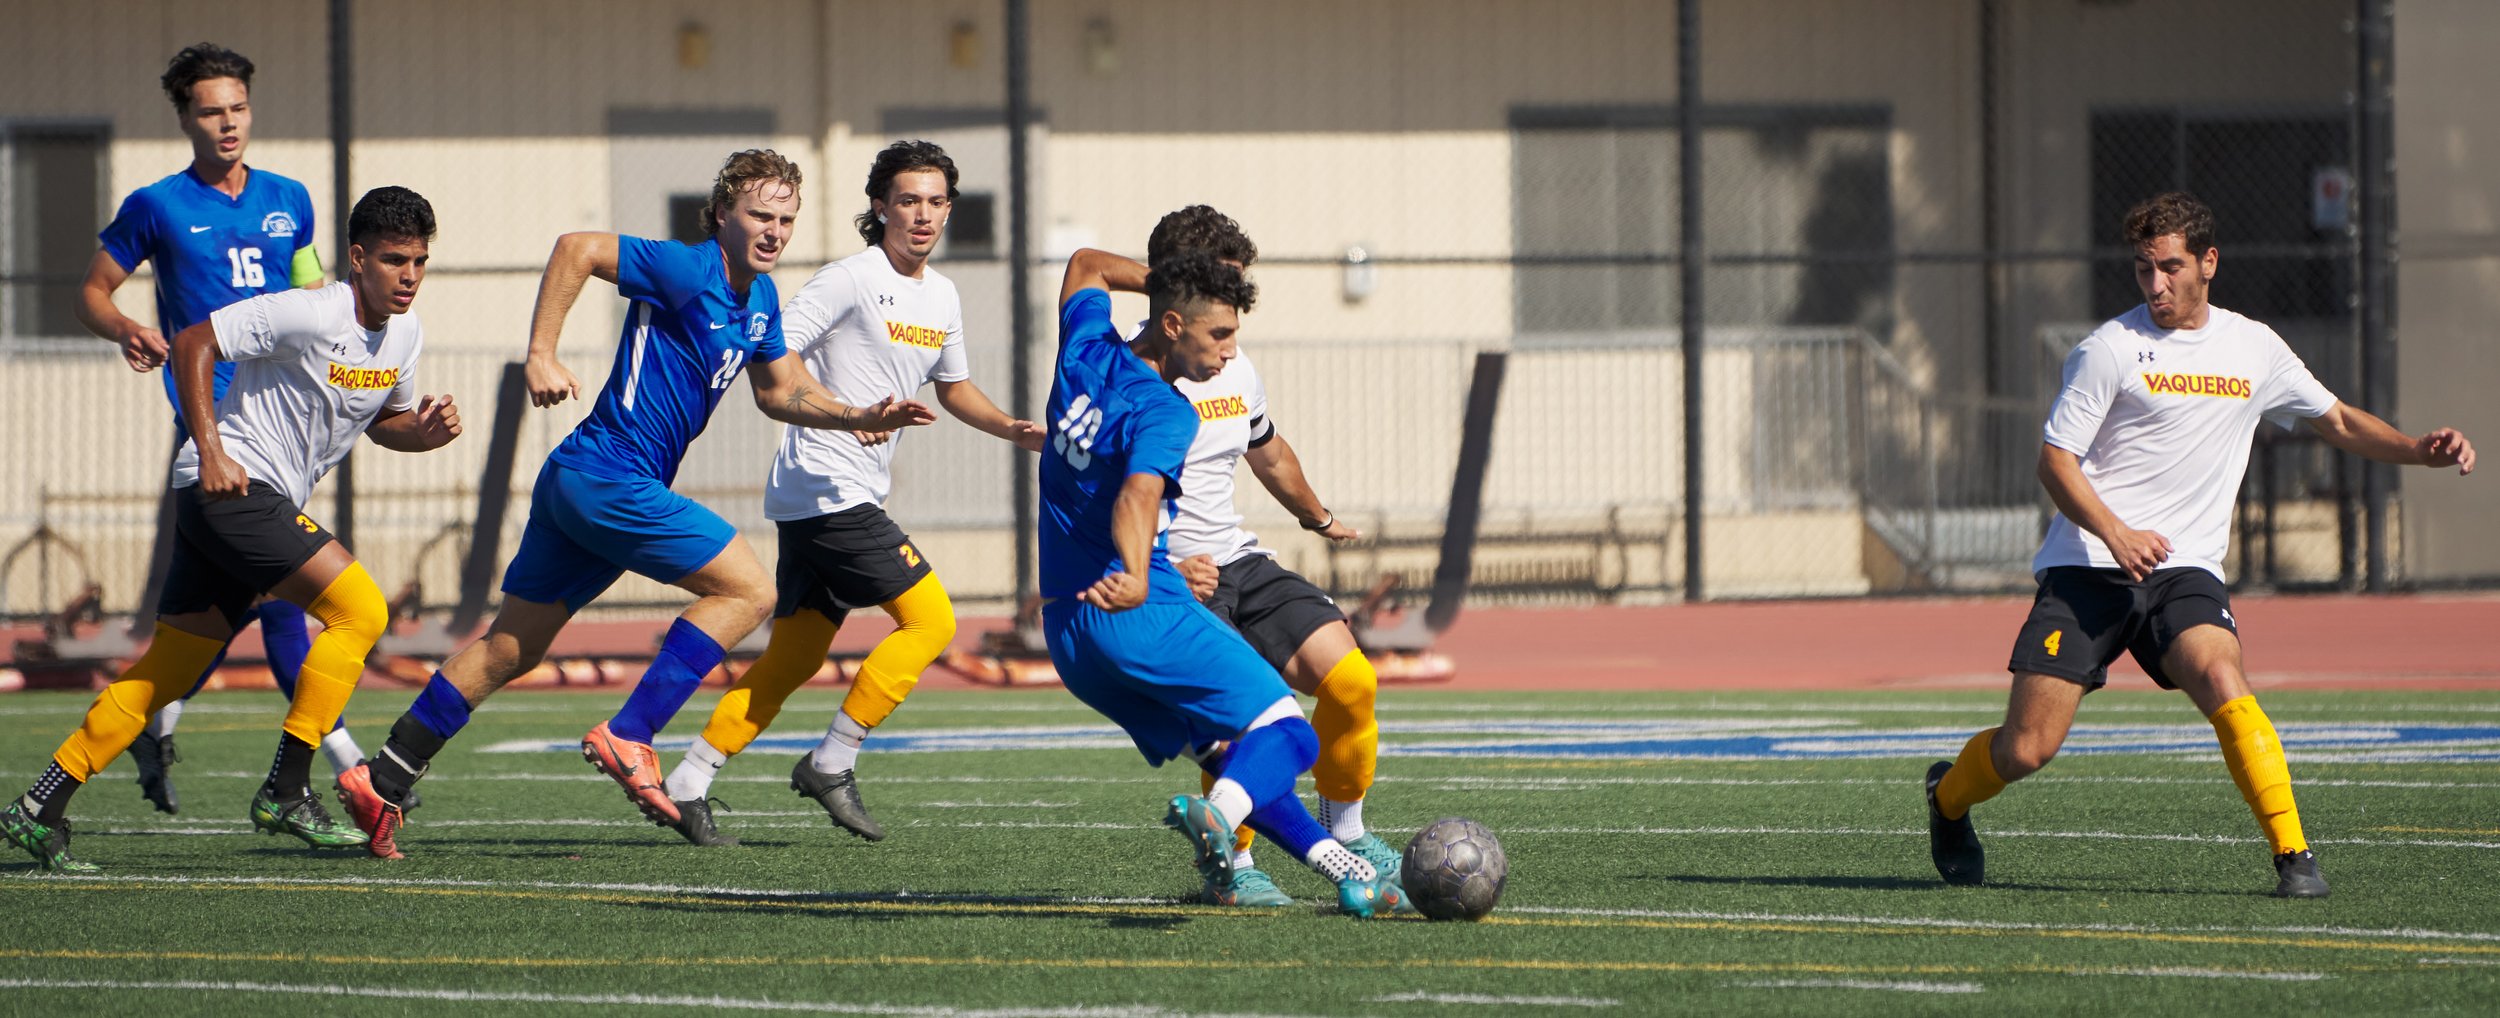  The men's soccer match between the Santa Monica College Corsairs and the Glendale Community College Vaqueros at on Tuesday, Sept. 27, 2022, at Corsair Field in Santa Monica, Calif. The Corsairs won 3-0. (Nicholas McCall | The Corsair) 